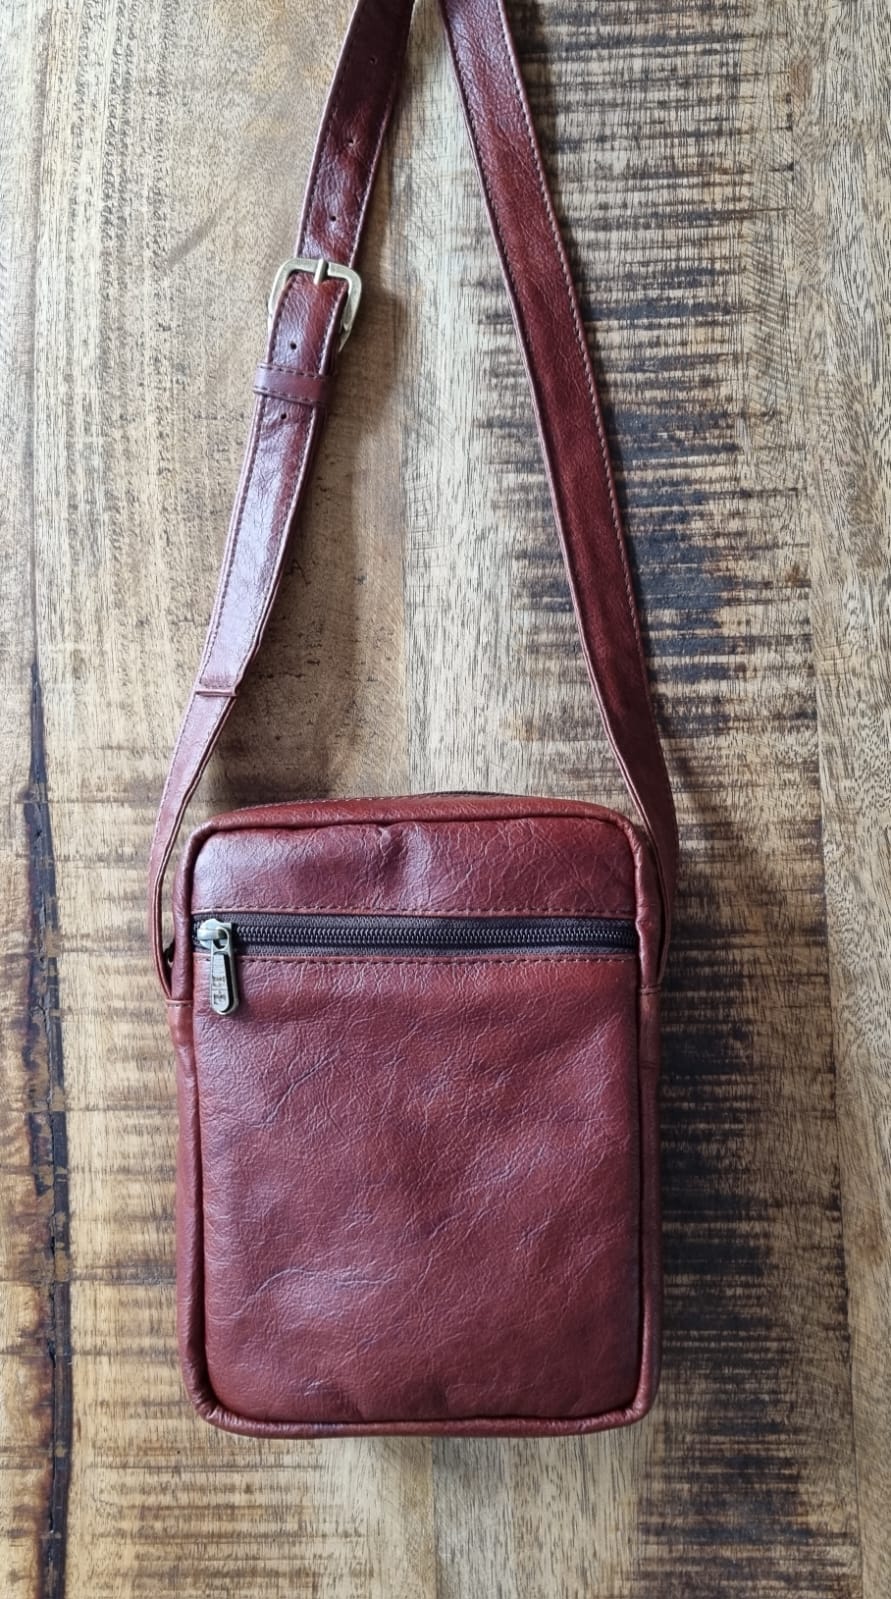 Urban-compact-sling-bag-leather-strap